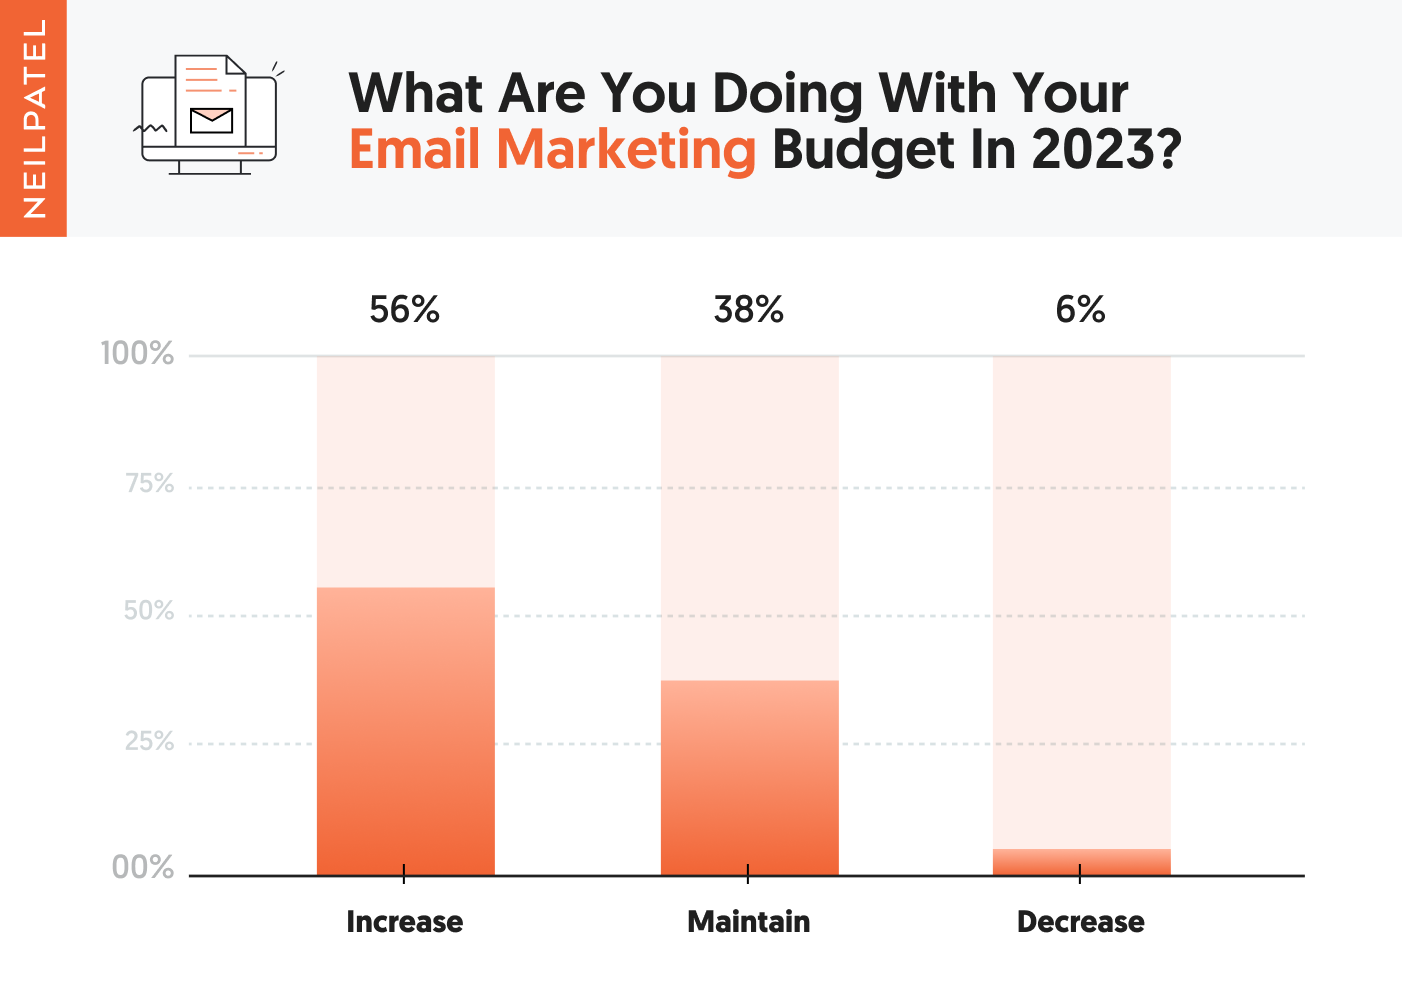 What are you doing with your email marketing budget in 2023